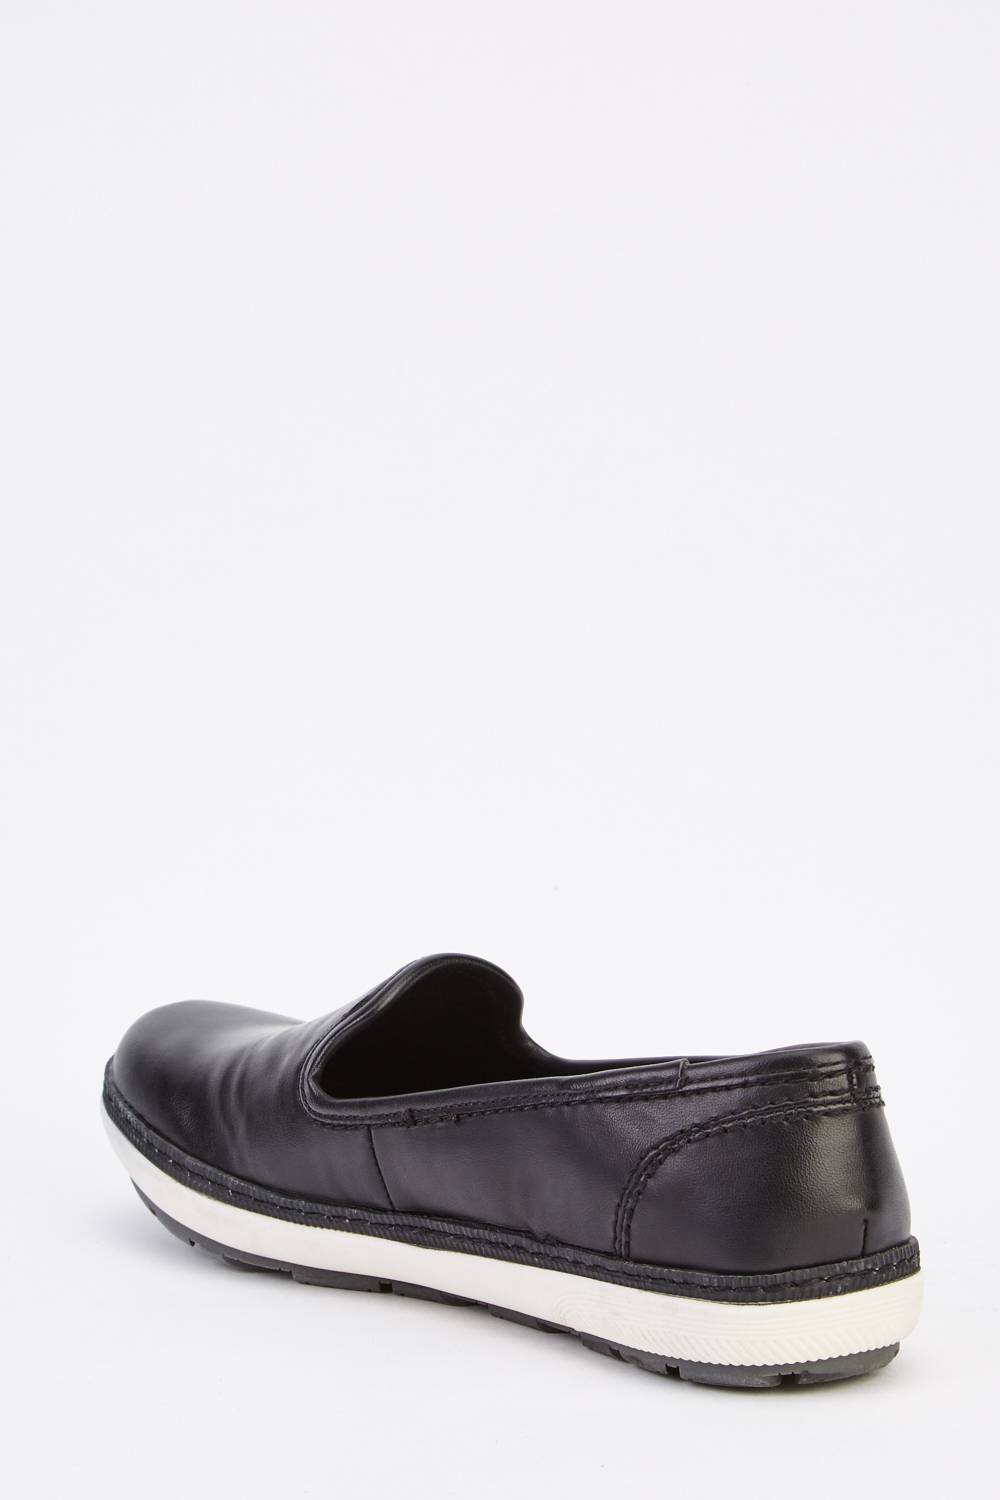 Faux Leather Slip On Shoes - Just $6